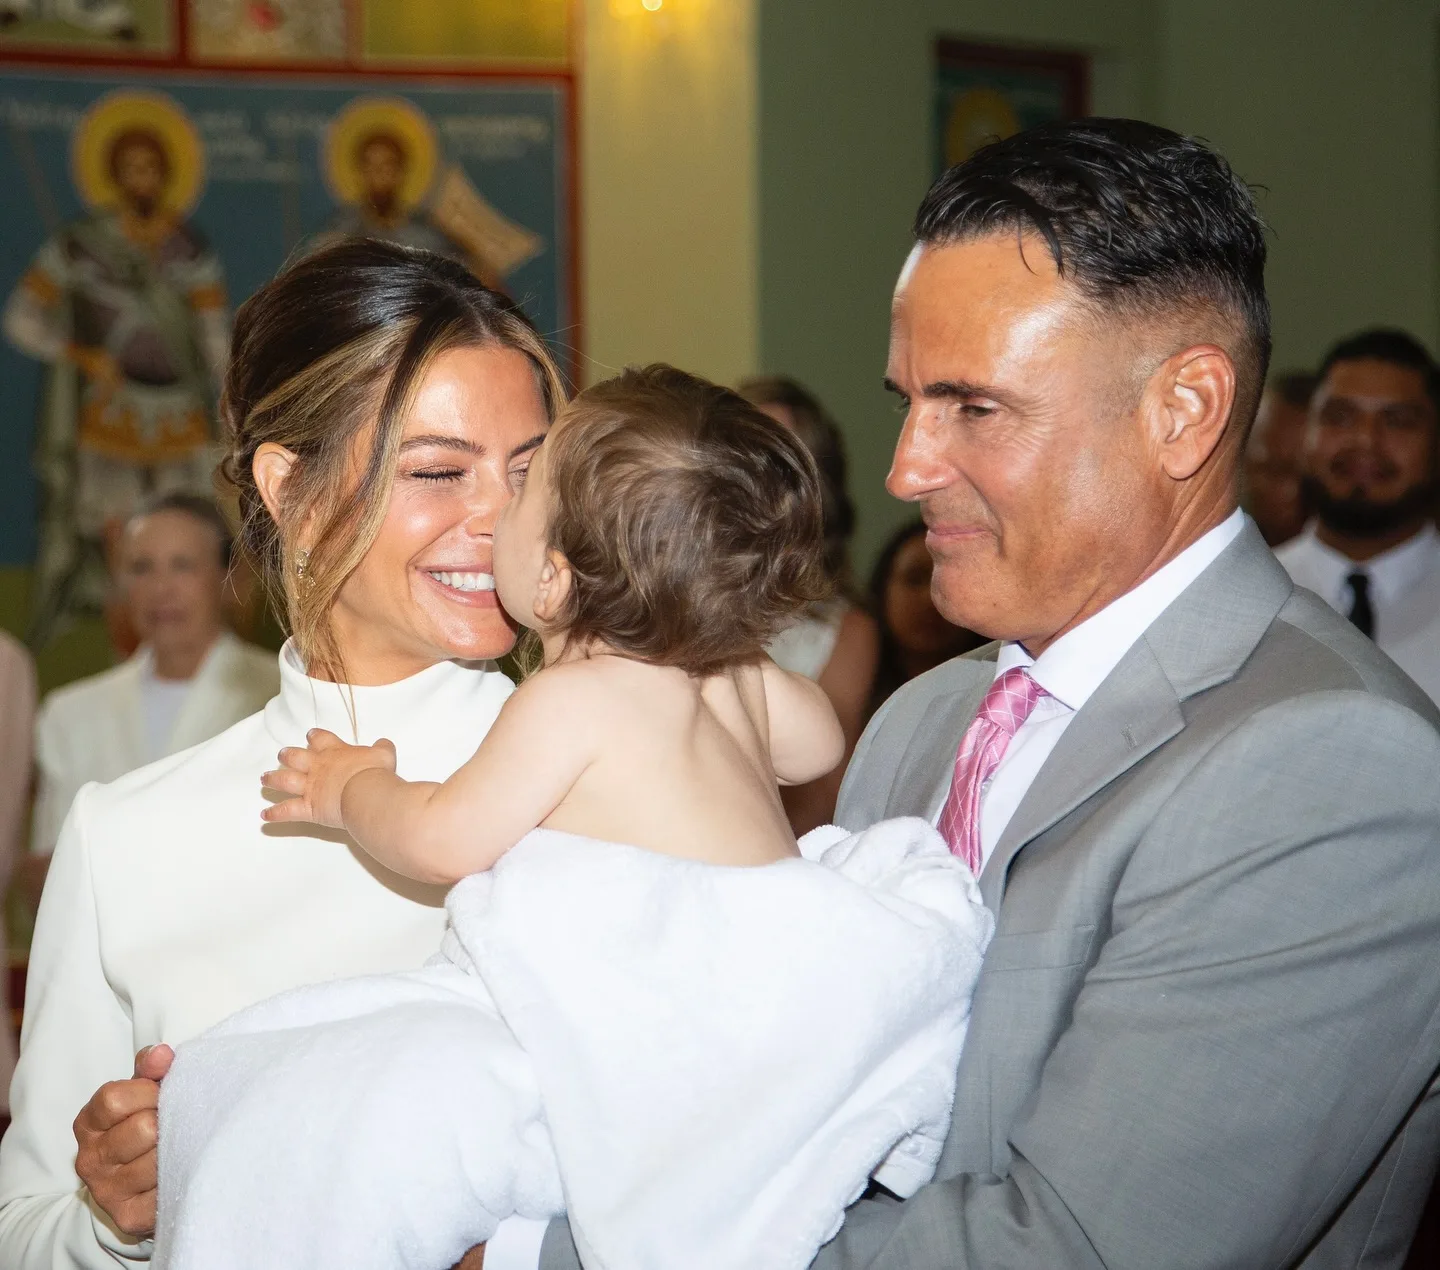 Maria Menounos recently celebrated the christening of her beautiful daughter, Athena, at St. Nectarios Church. Grateful for the miracles associated with the church, Maria chose this special place for the ceremony